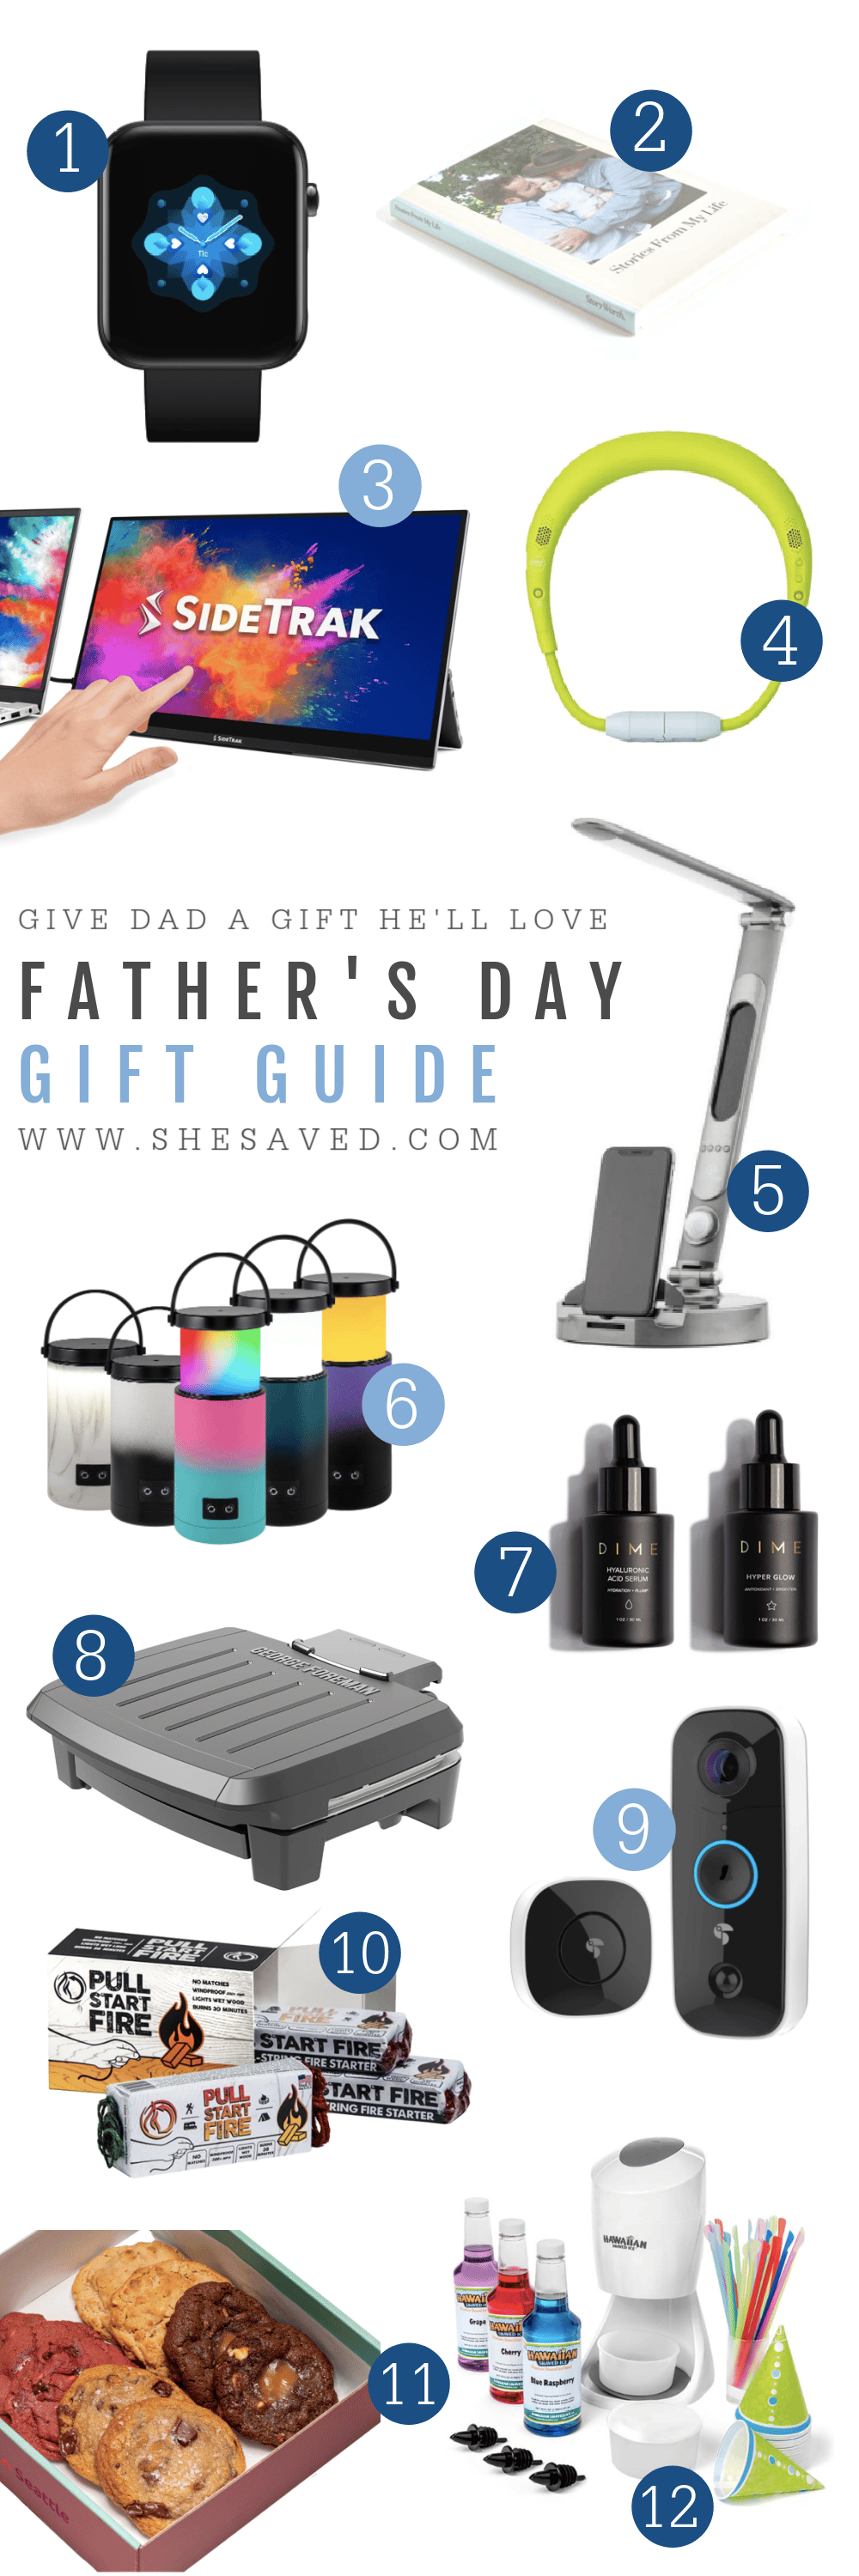 https://www.shesaved.com/wp-content/uploads/2022/06/2022-Gift-Ideas-for-Fathers-Day.png